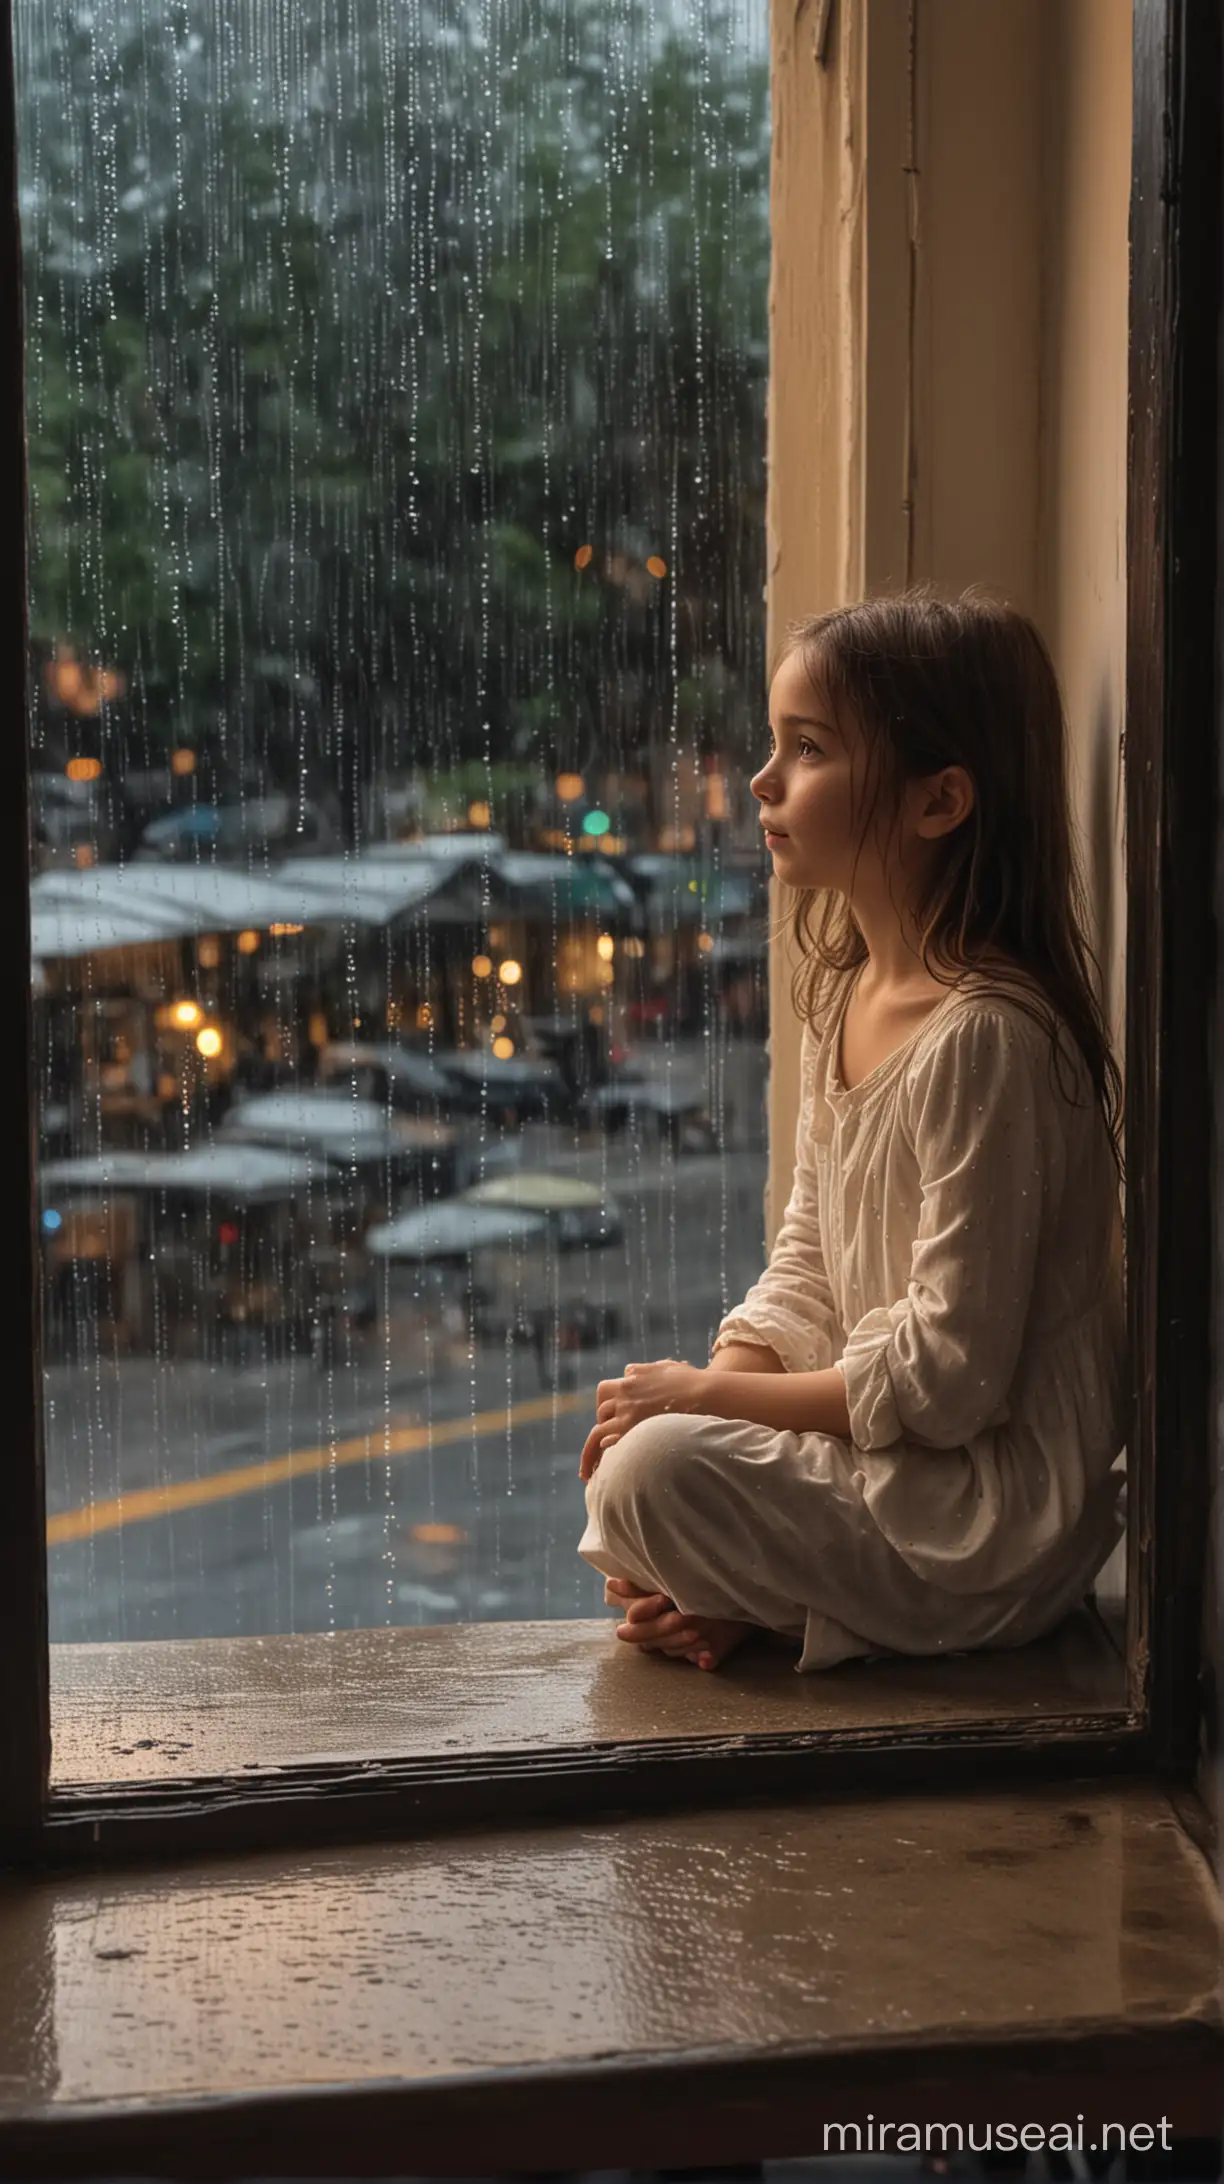 Sitting in front of the caf é window, the gentle rain of the night pours down like delicate threads. The little girl sits
quietly by the window, her gaze slightly dreamy yet focused on the threads of rain.